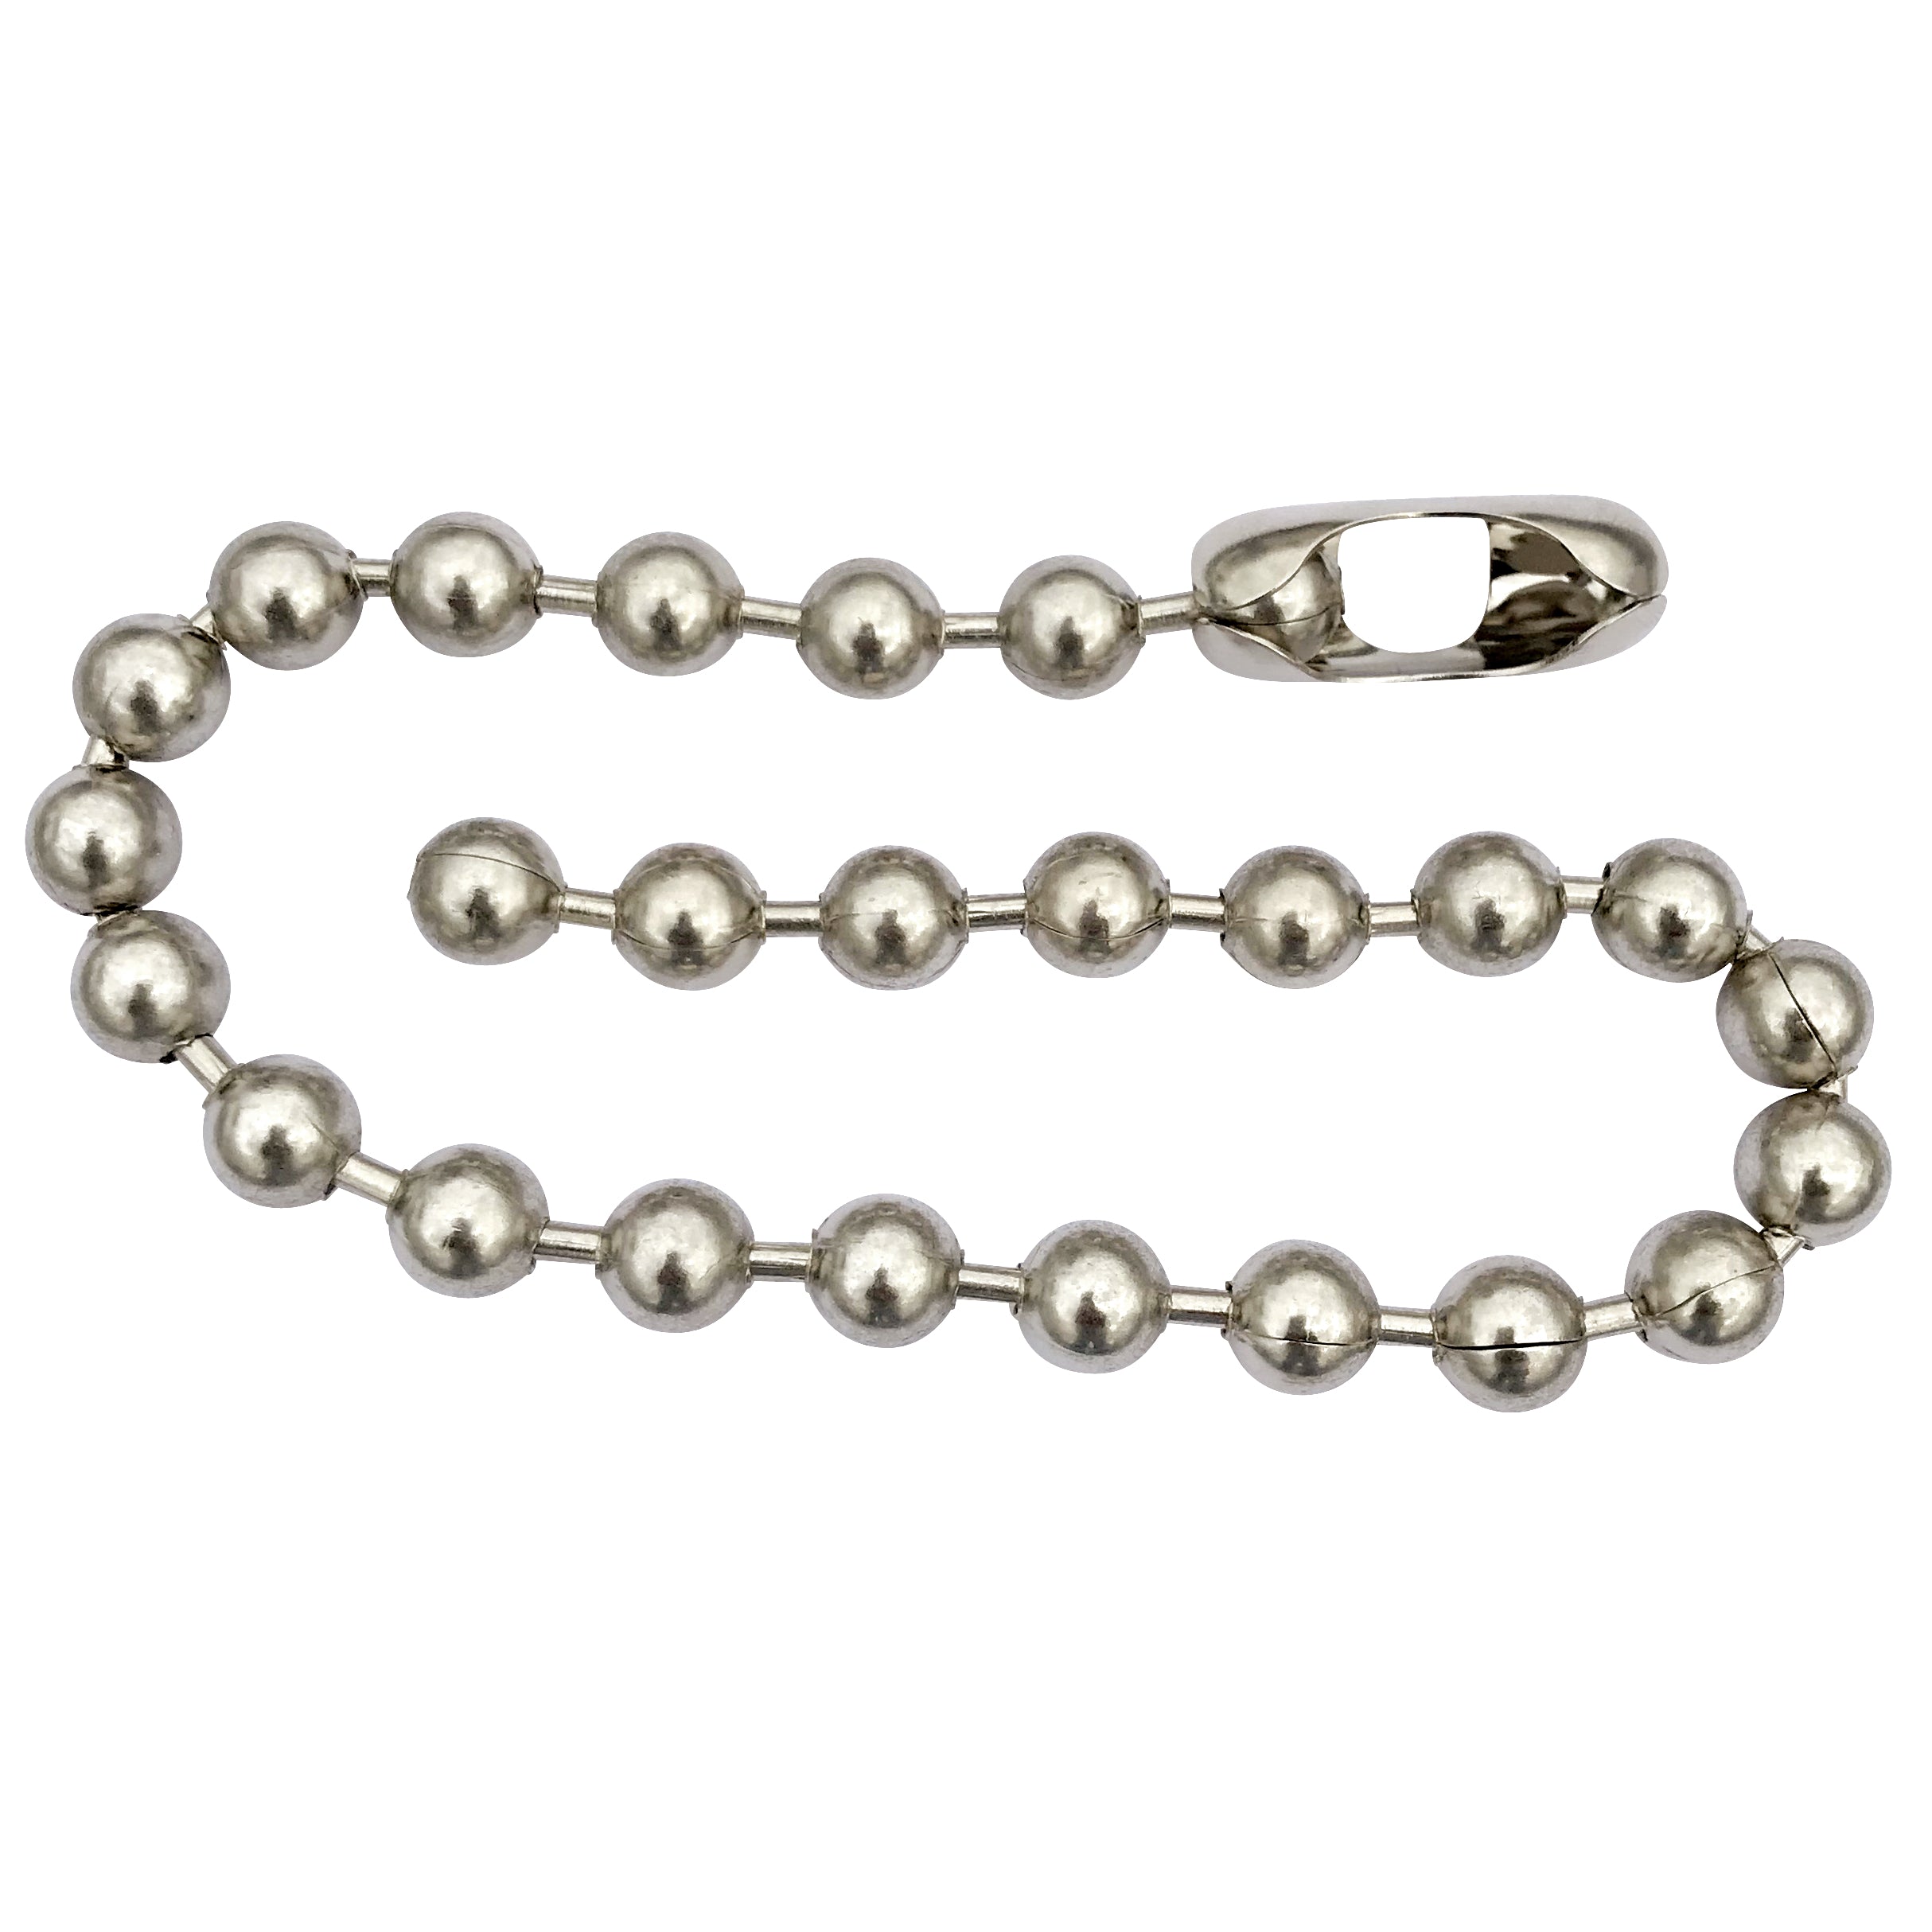 8mm Oversized Stainless Steel Ball Chain, Non Tarnish Chain,silver